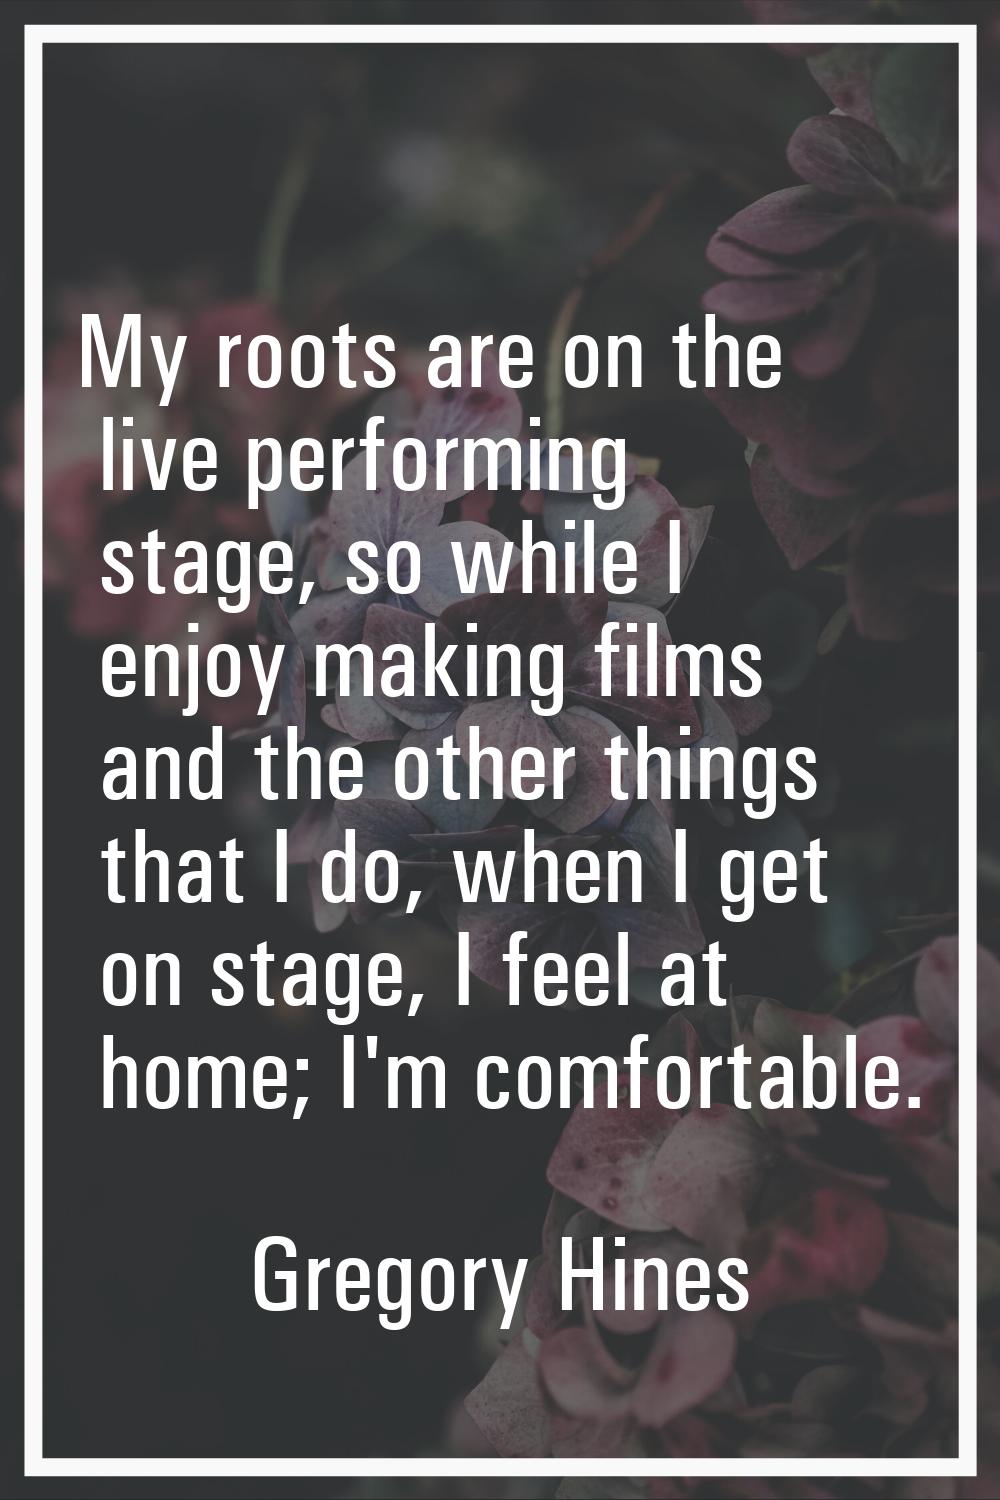 My roots are on the live performing stage, so while I enjoy making films and the other things that 